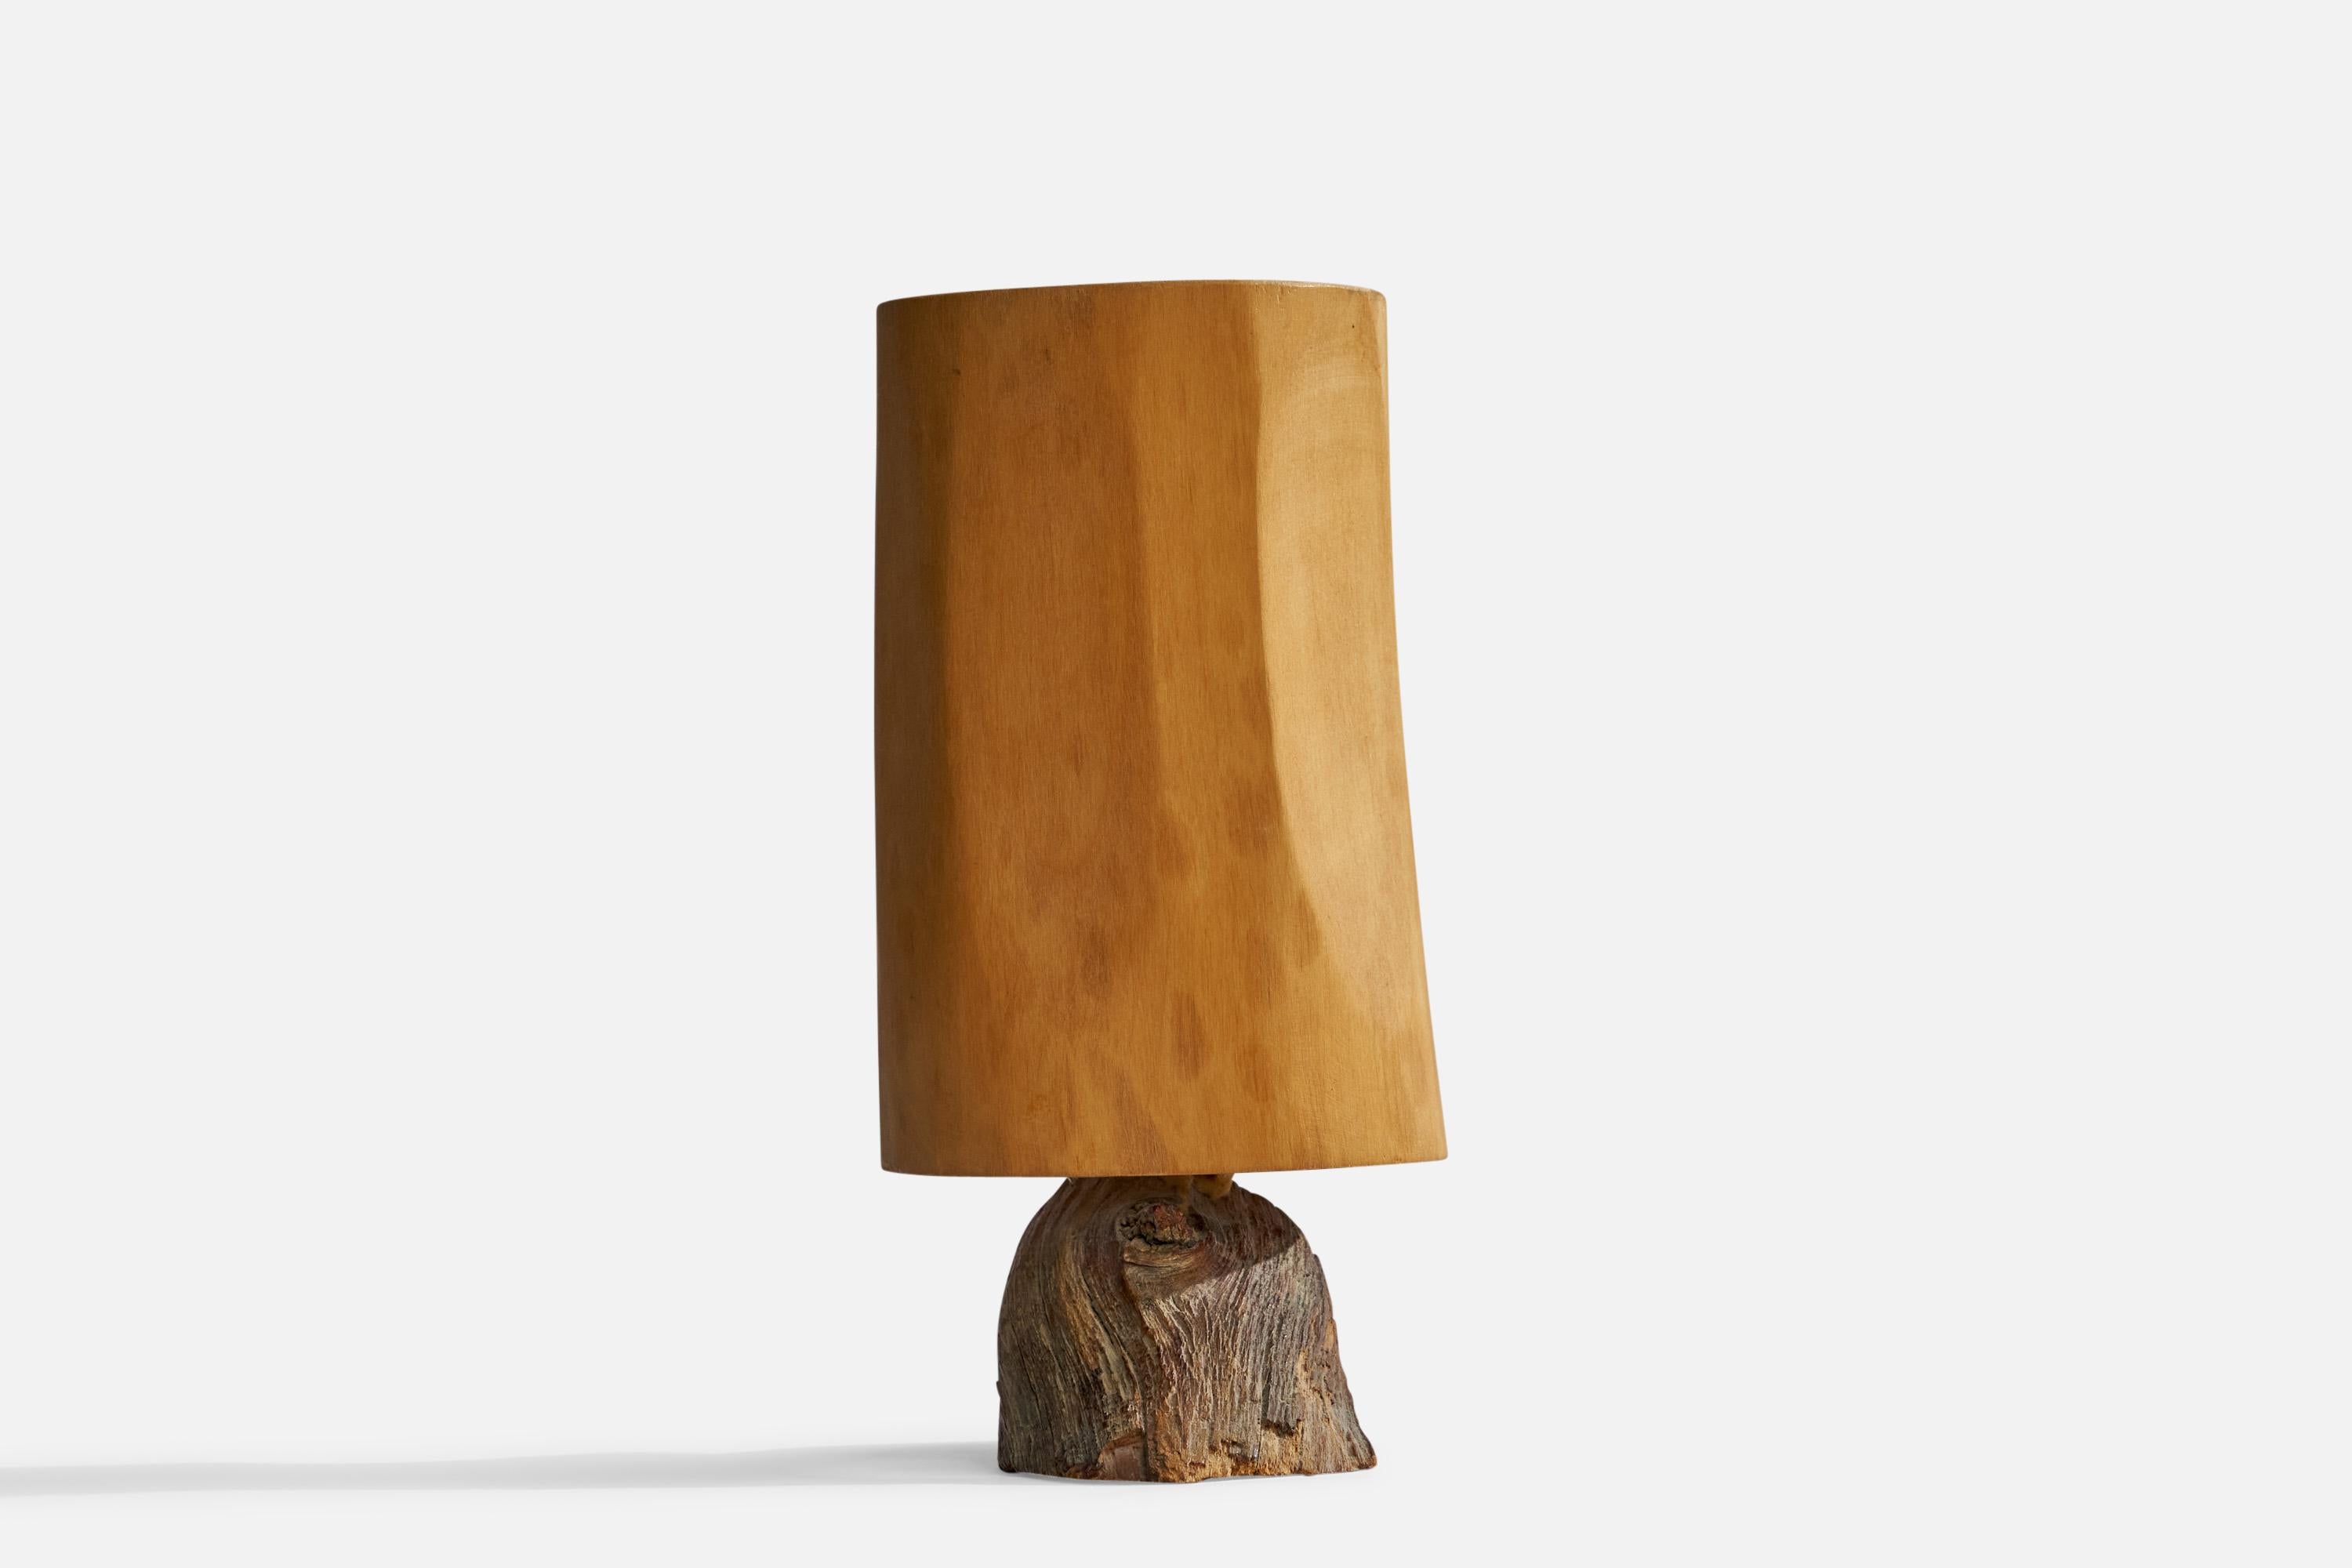 A carved wood and driftwood table lamp designed and produced by Kurt Schmidt, Sweden, dated 1980.

Overall Dimensions (inches): 8”  H x 4.75”  W x 3.5”  D
Stated dimensions include shade.
Bulb Specifications: E-14 Bulb
Number of Sockets: 1
All